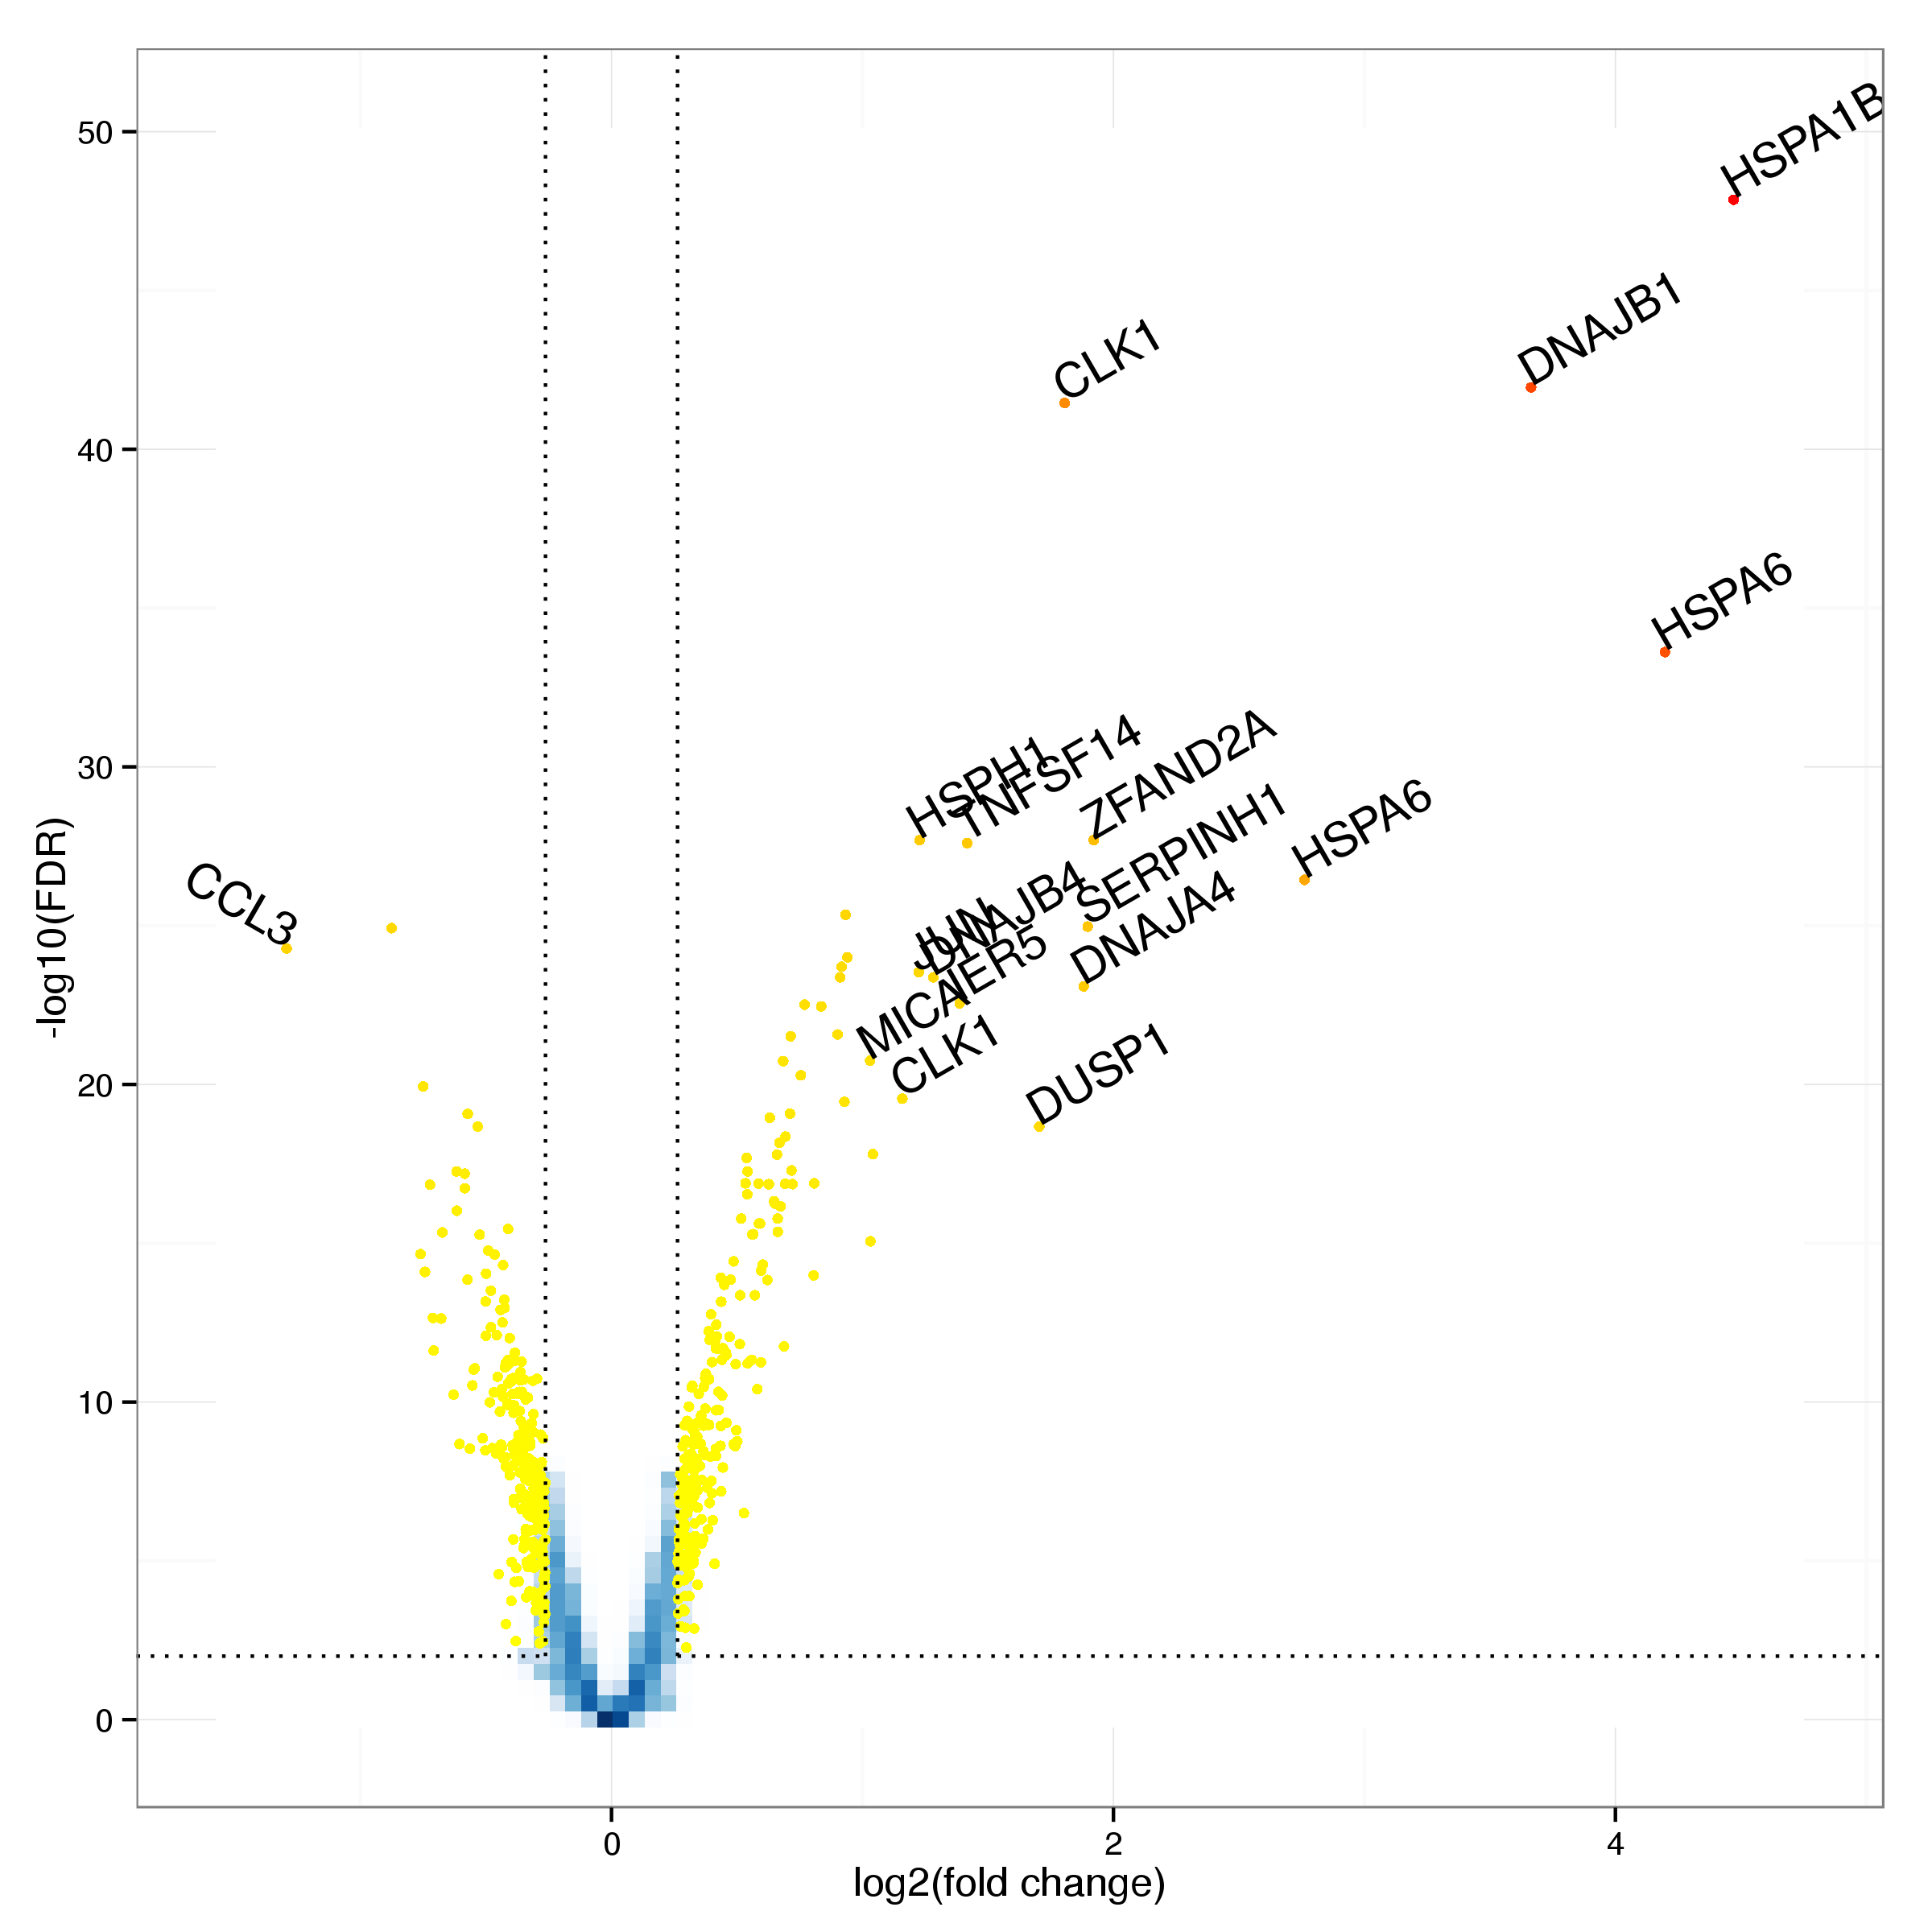 **Figure 9:** Volcano plot of differential expression results. Probes with an adjusted p-value below 0.01 and a log fold cange of at least 0.5 are shown as yellow and red dots. Probes showing particularly strong evidence of changes in gene expression through a combination of p-value and fold change are labelled with the corresponding gene symbol.